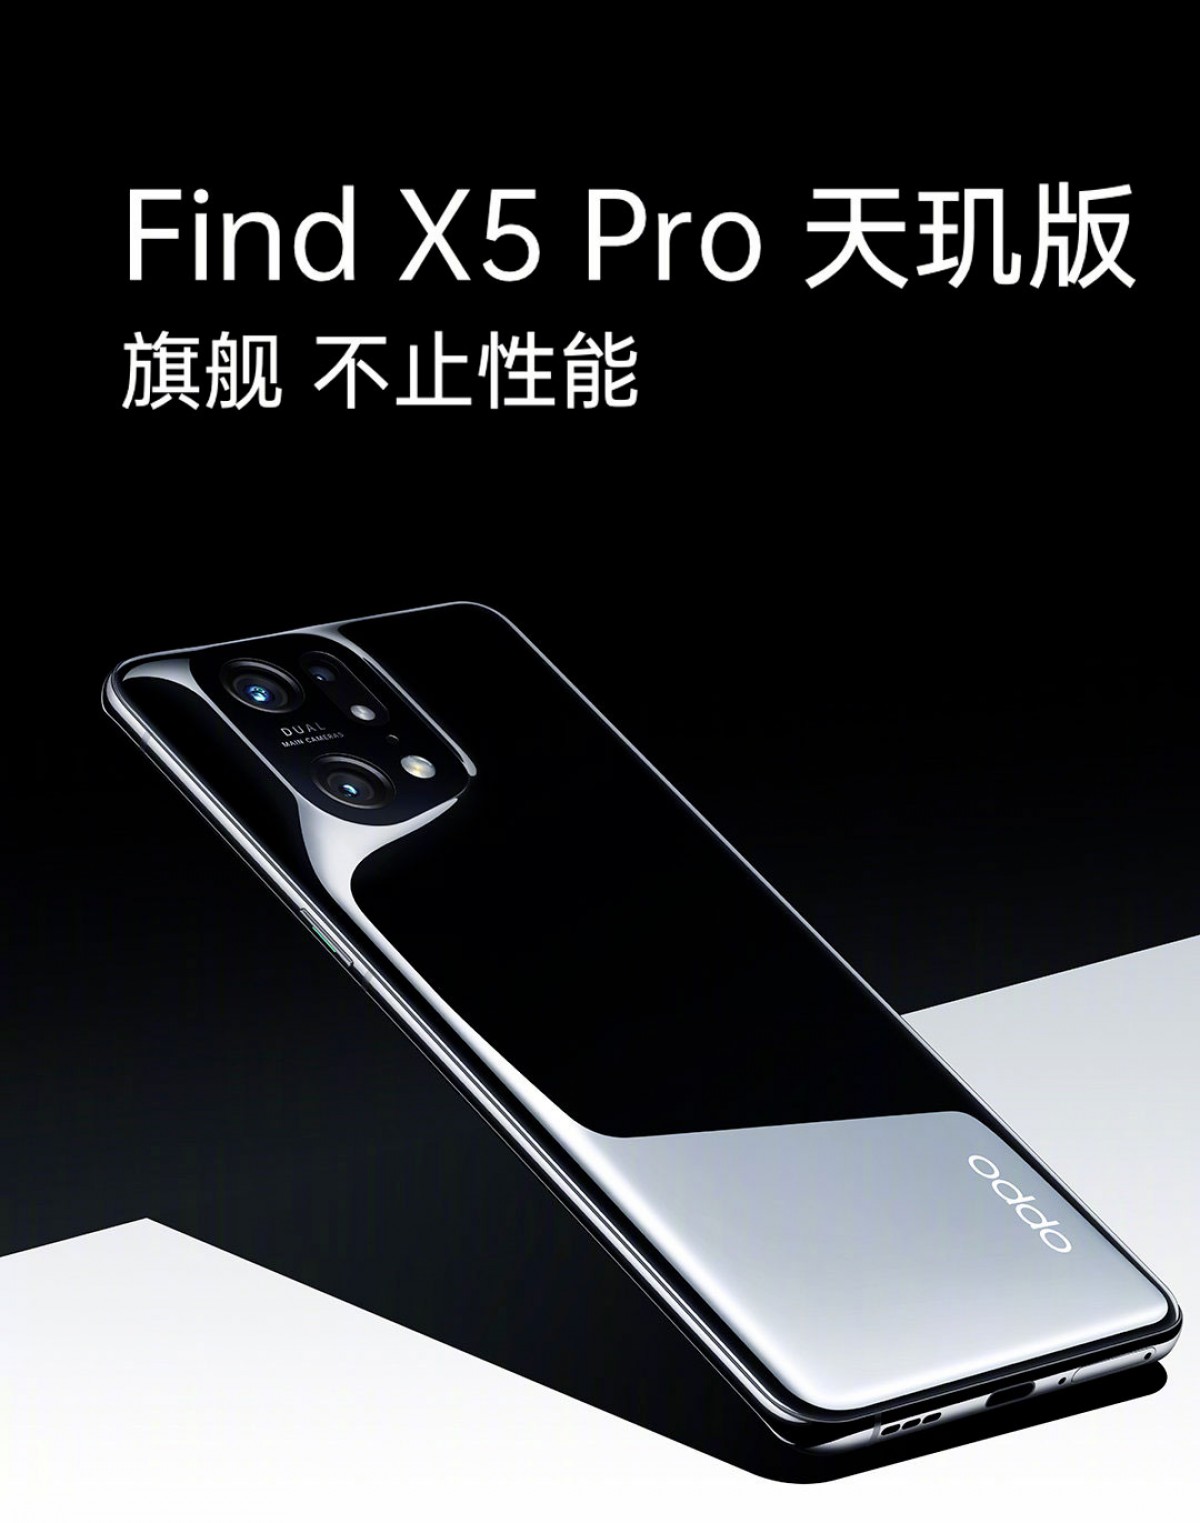 Oppo Find X5 Pro - Specifications, Release Date, Latest News (28th February  2024)